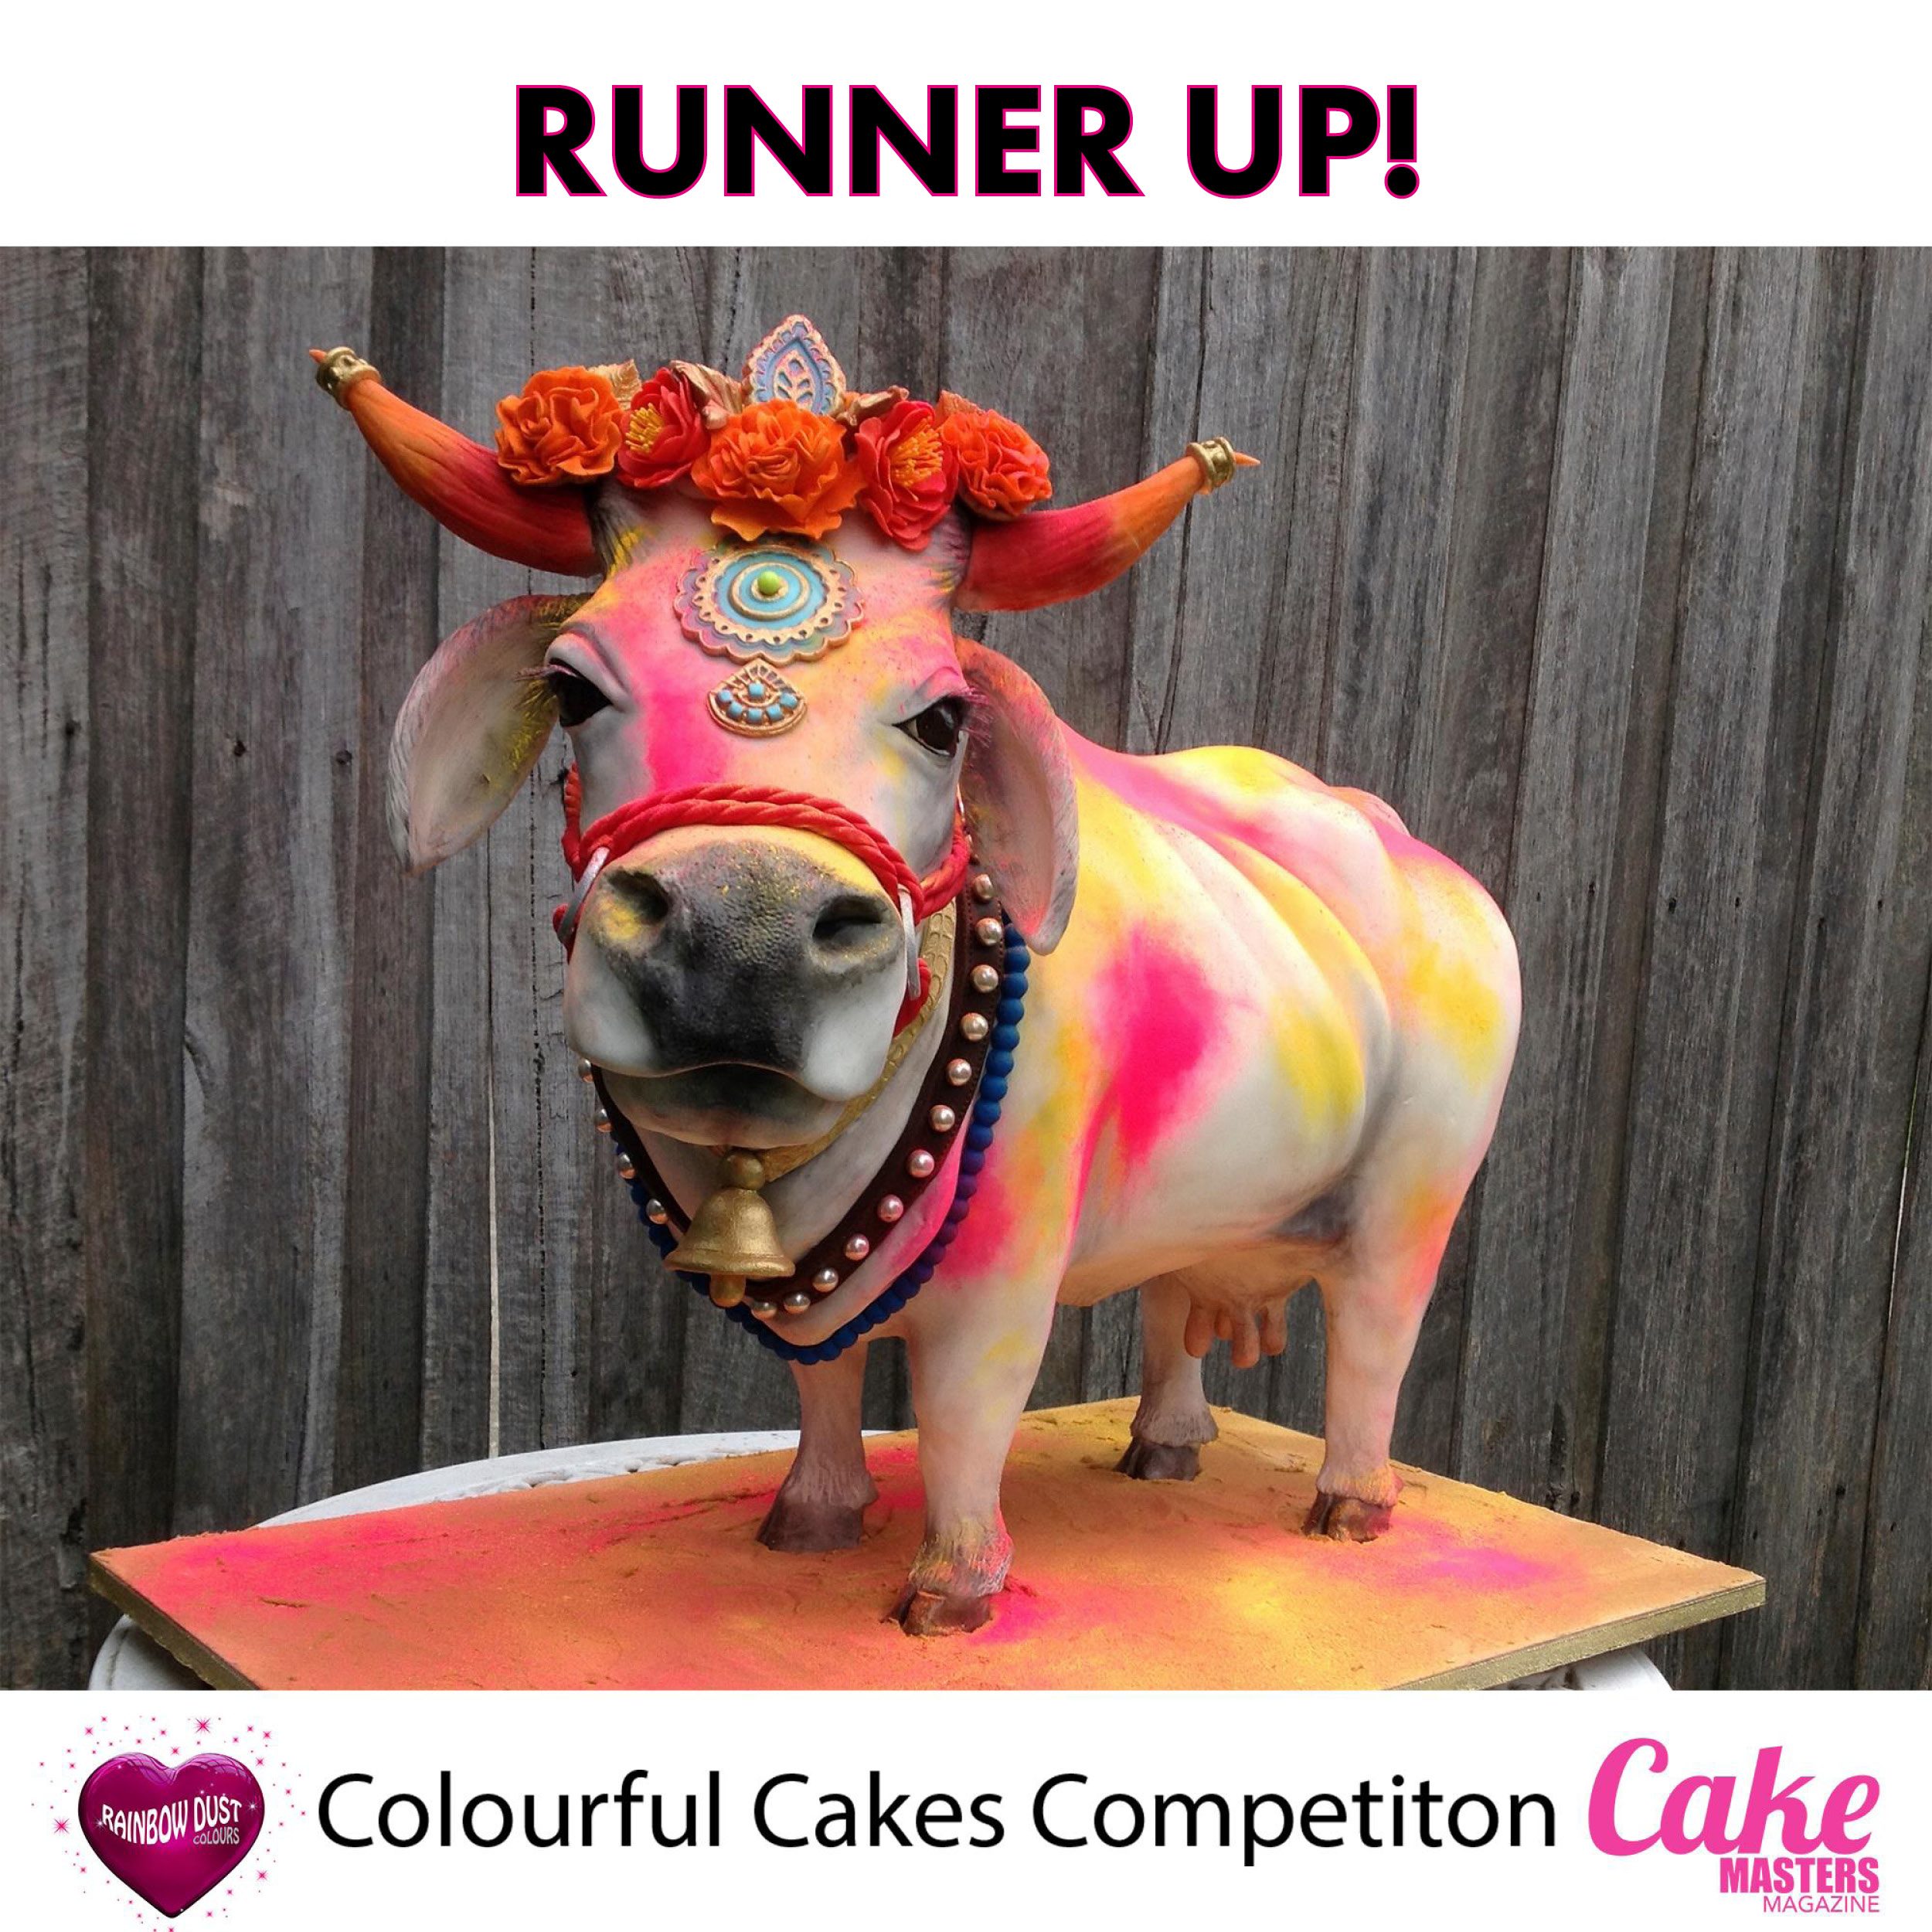 Colourful Cakes Comp FB - Runner Up Penny Bunz, Cleopatra Cakes